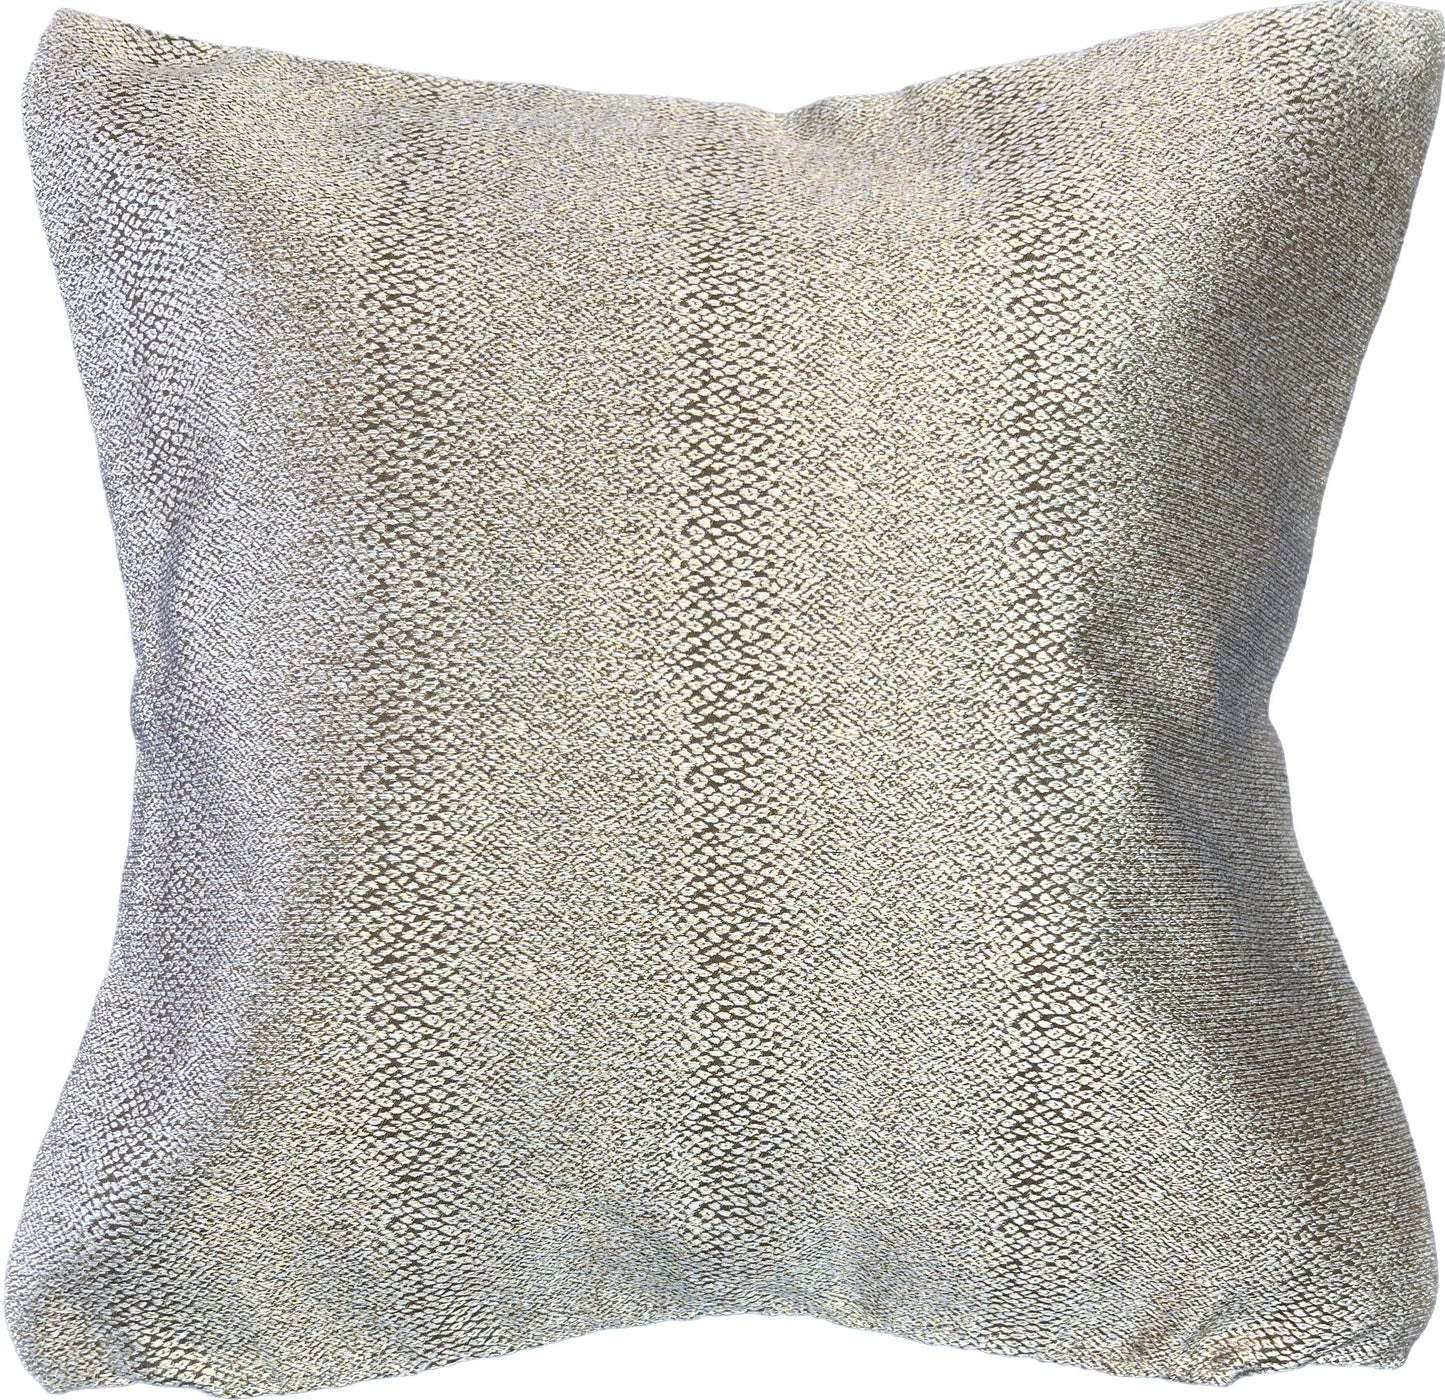 18"x18"  2-sided Pillow Cover - Face: Swirls / Back: Solid